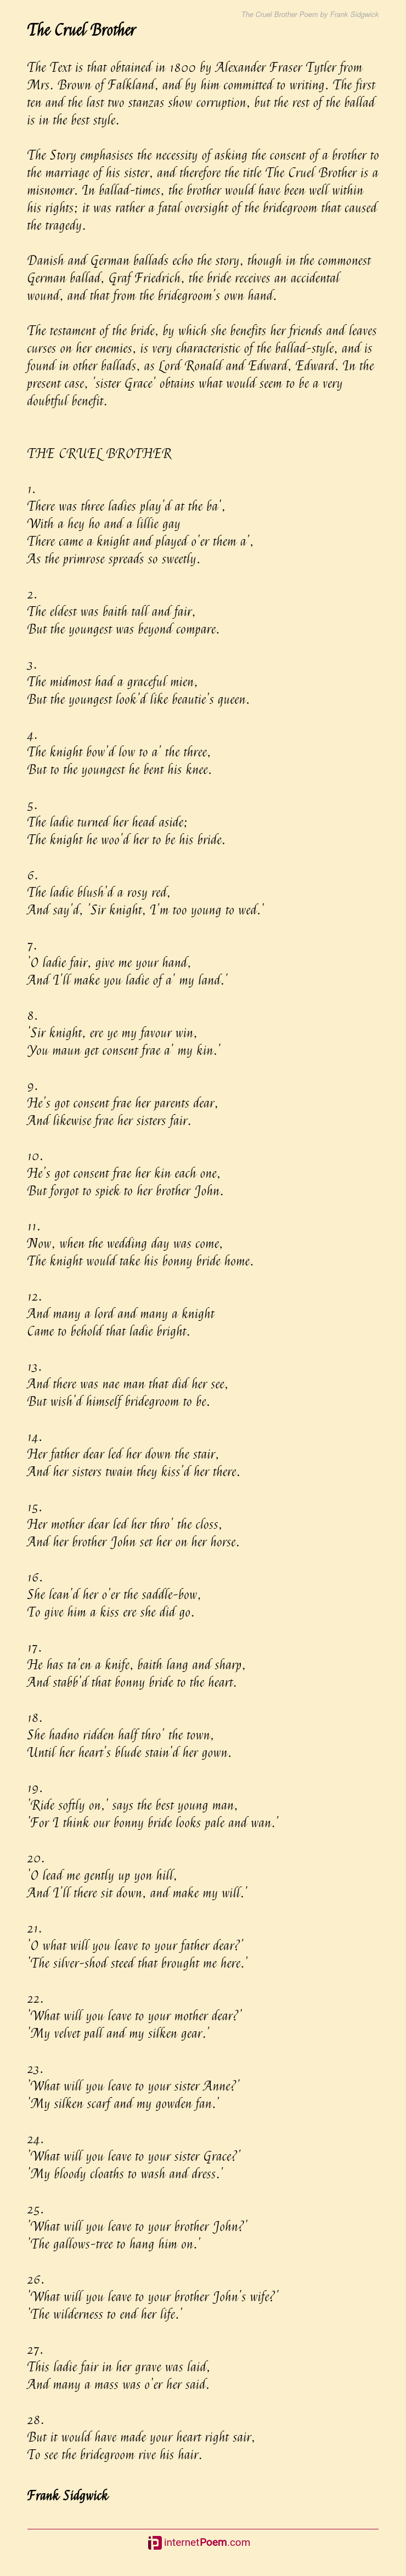 The Cruel Brother Poem By Frank Sidgwick 1638